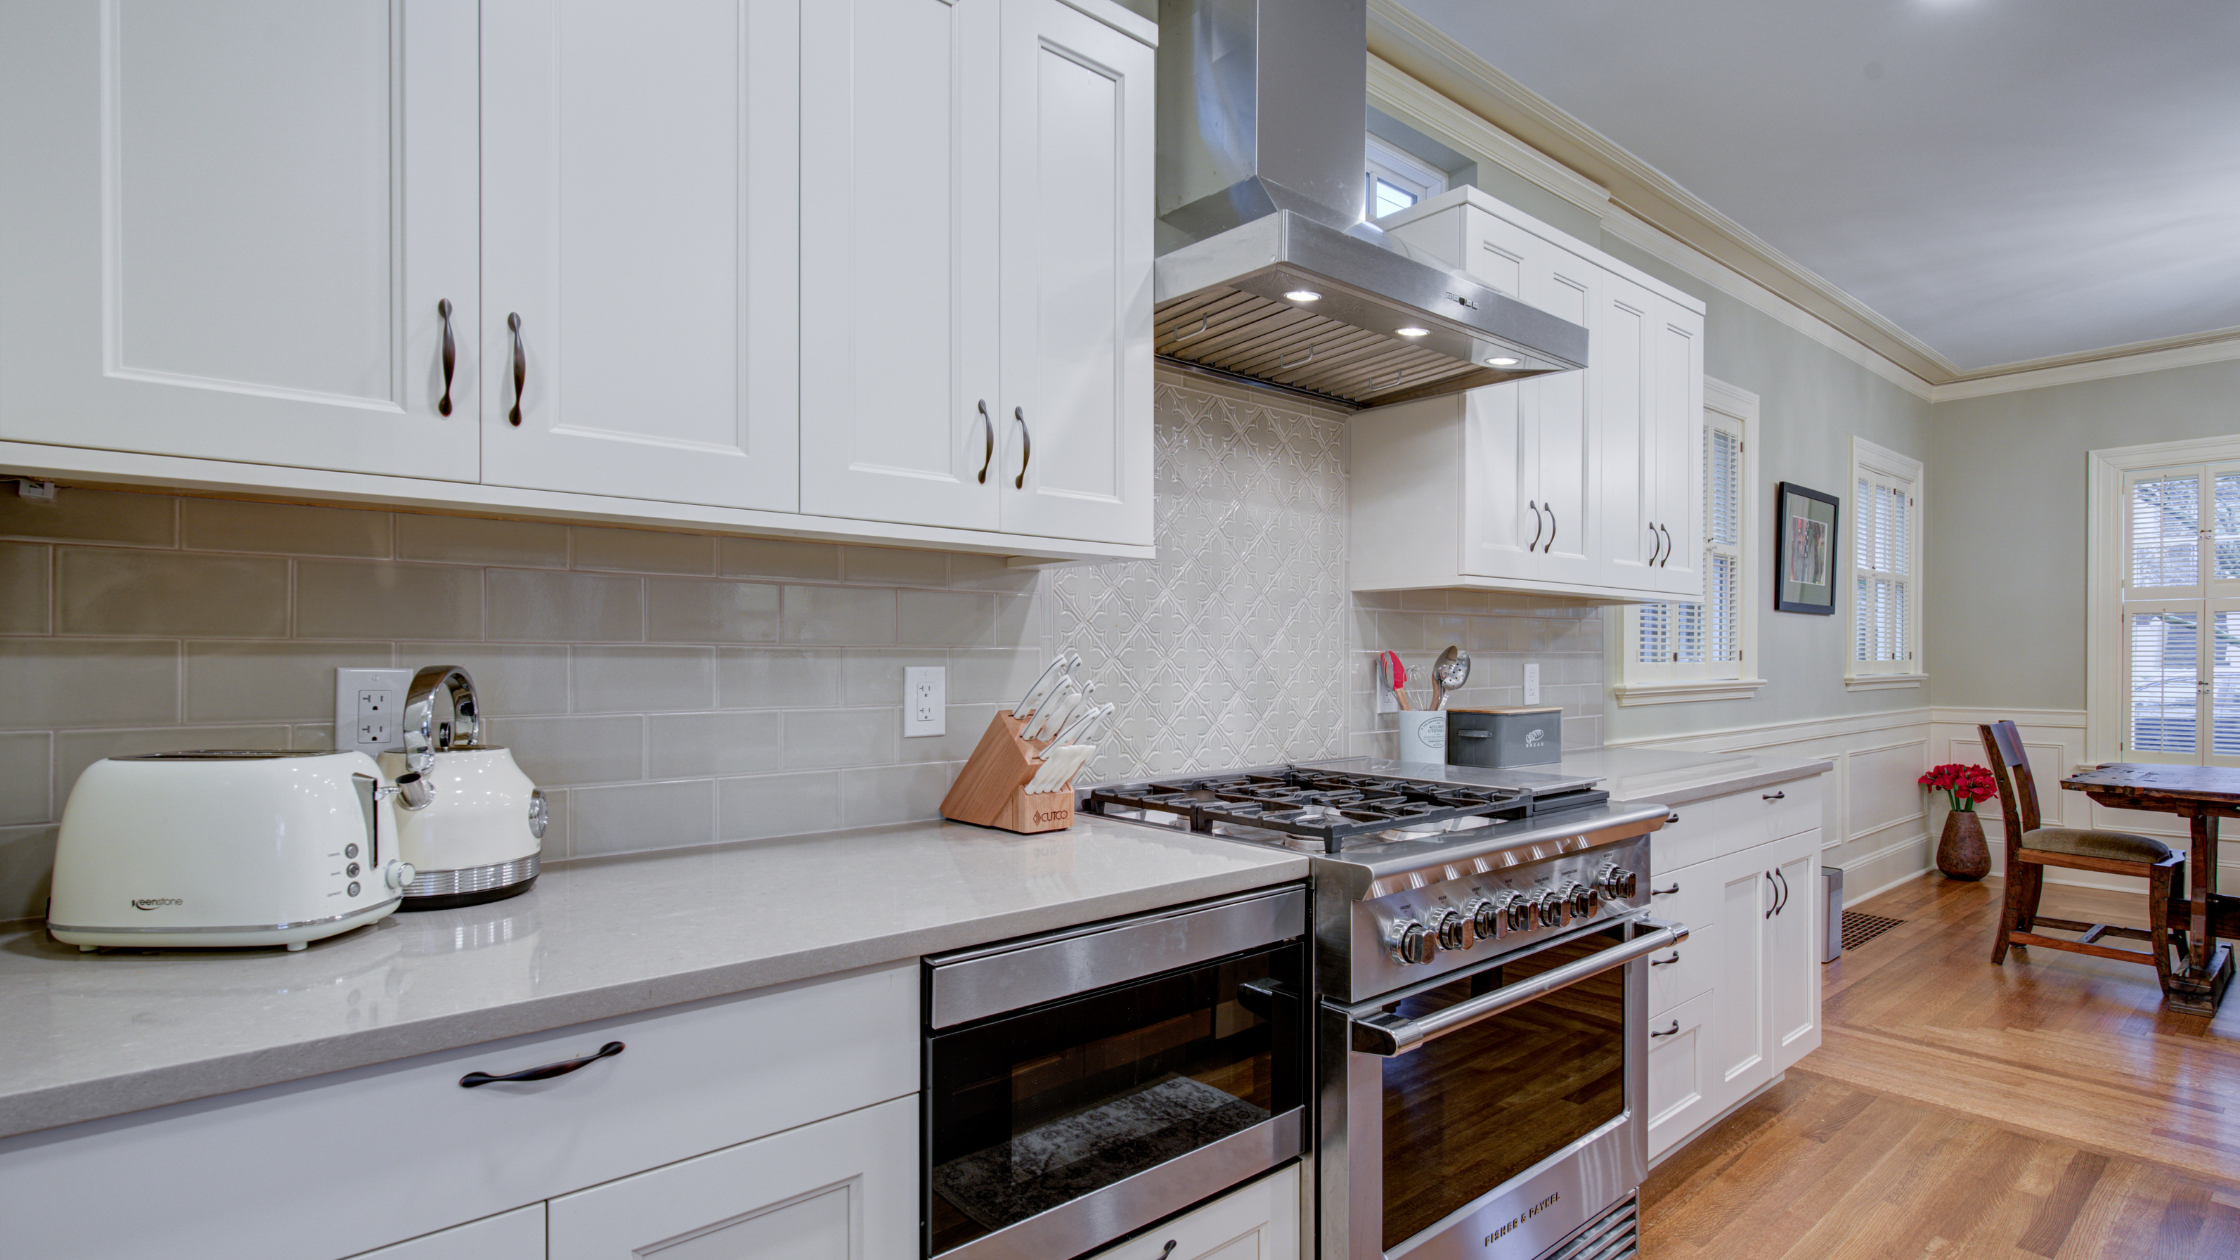 The Top 4 Problems With Poor Kitchen Cooking Ventilation and How to Solve Them